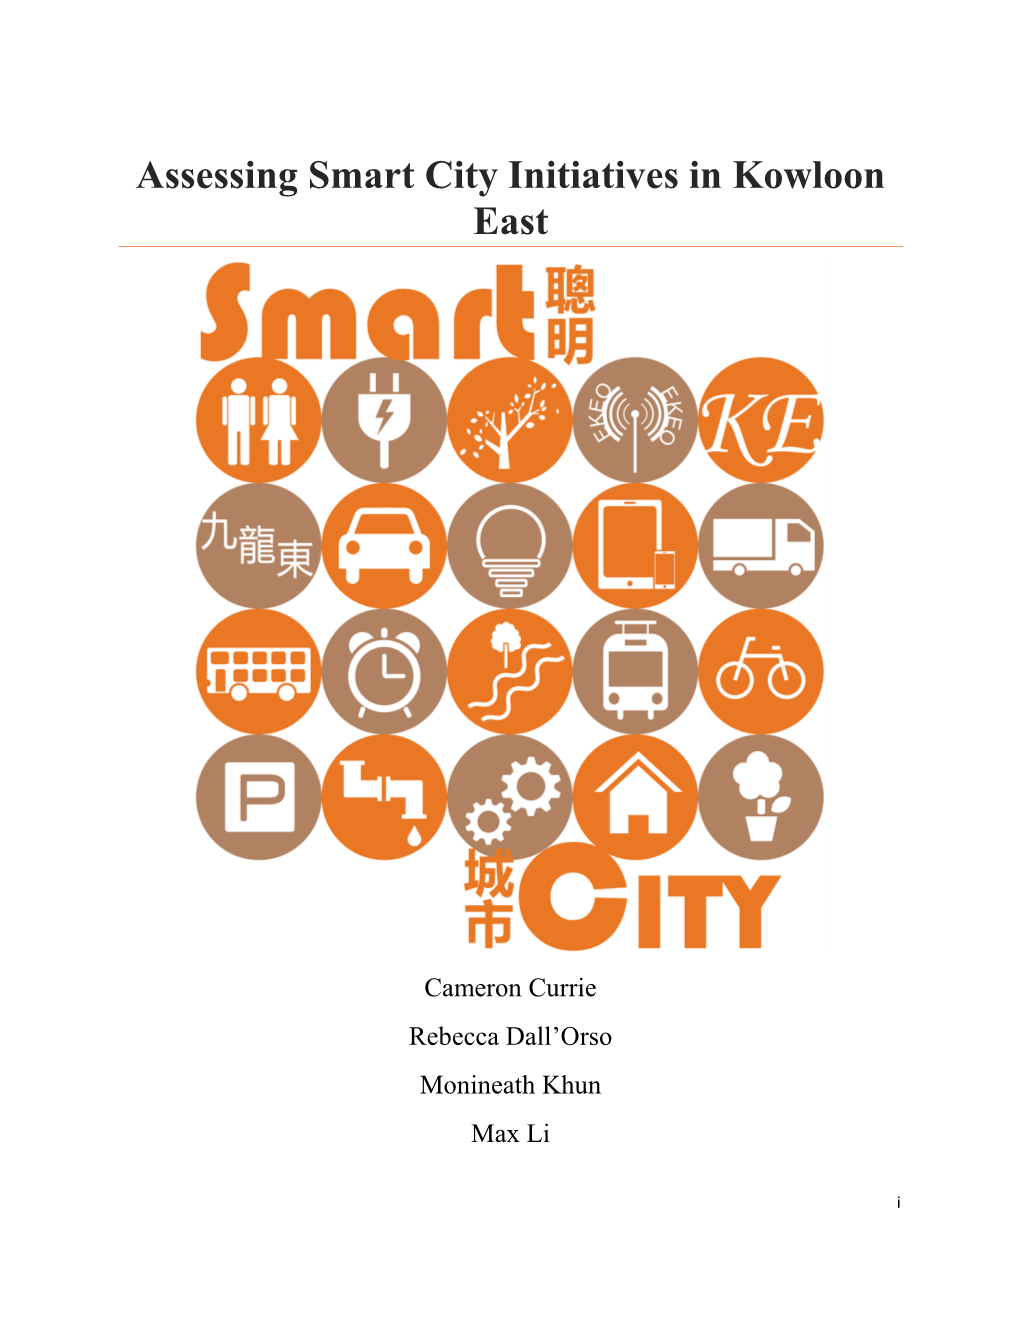 Assessing Smart City Initiatives in Kowloon East